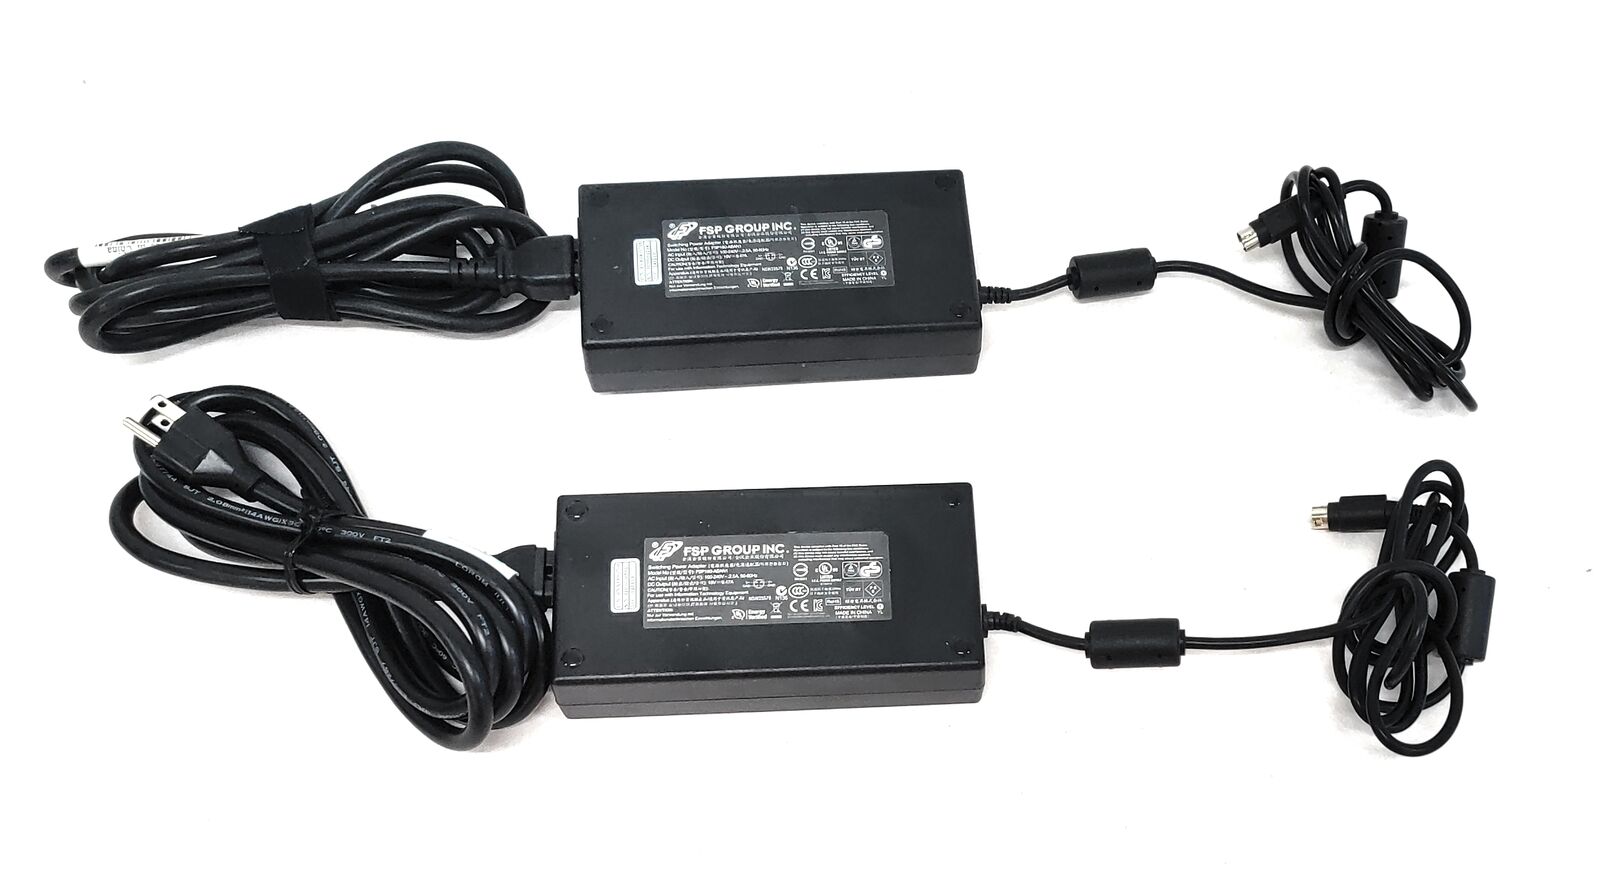 Lot of 2 OEM FSP Group AC Power Adapter/Charger 19V 9.47A 180W TESTED 4-Pin